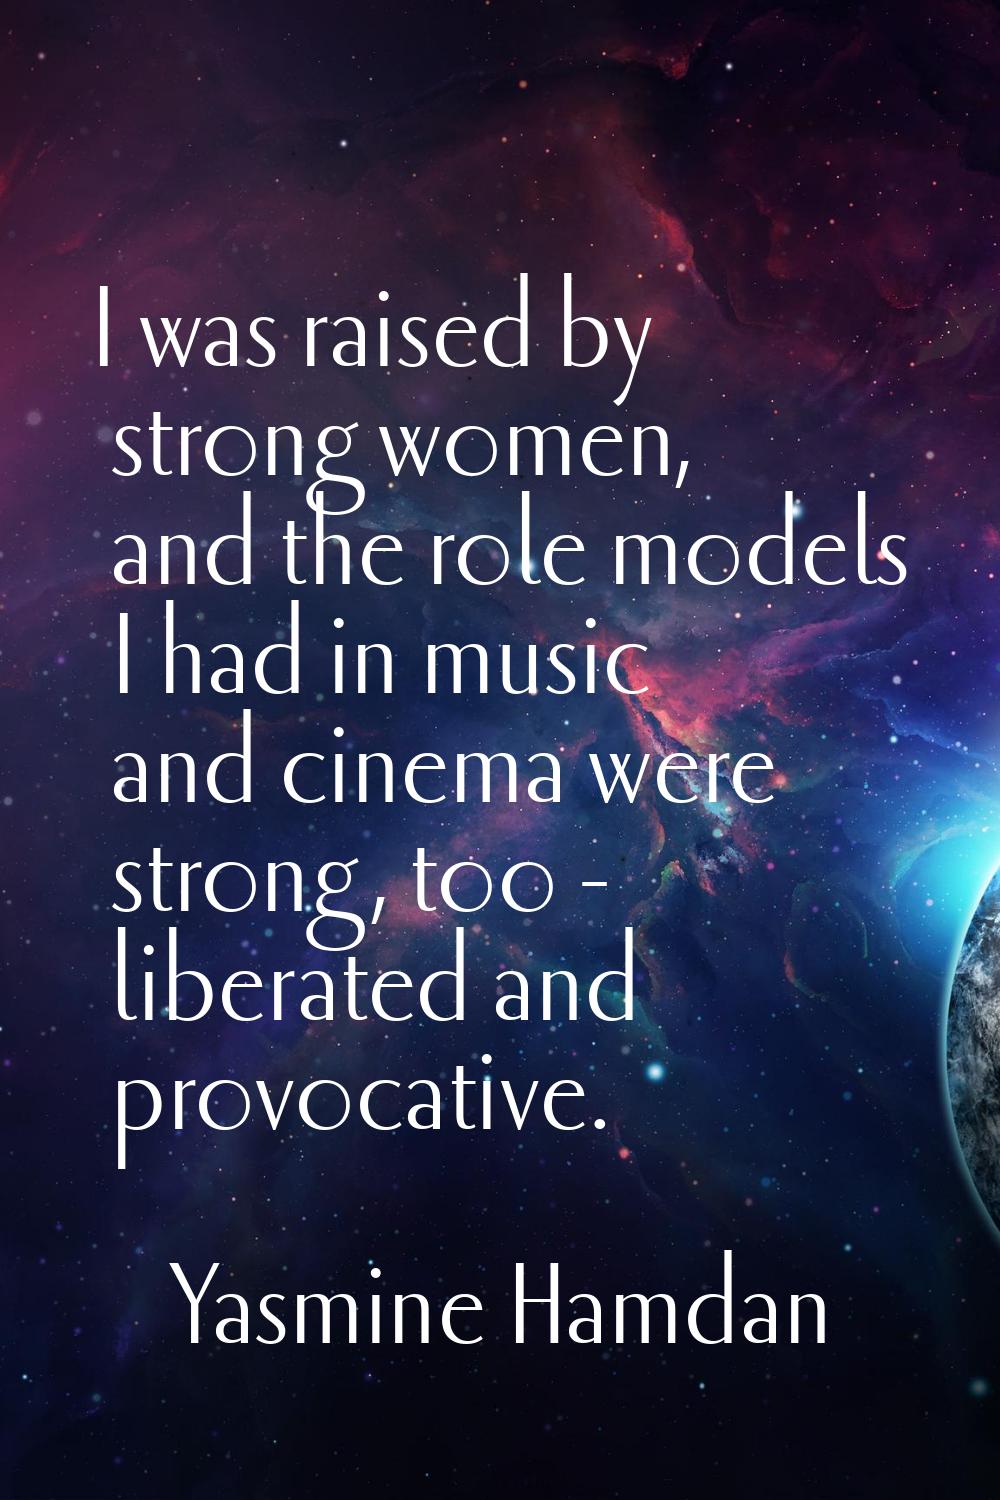 I was raised by strong women, and the role models I had in music and cinema were strong, too - libe